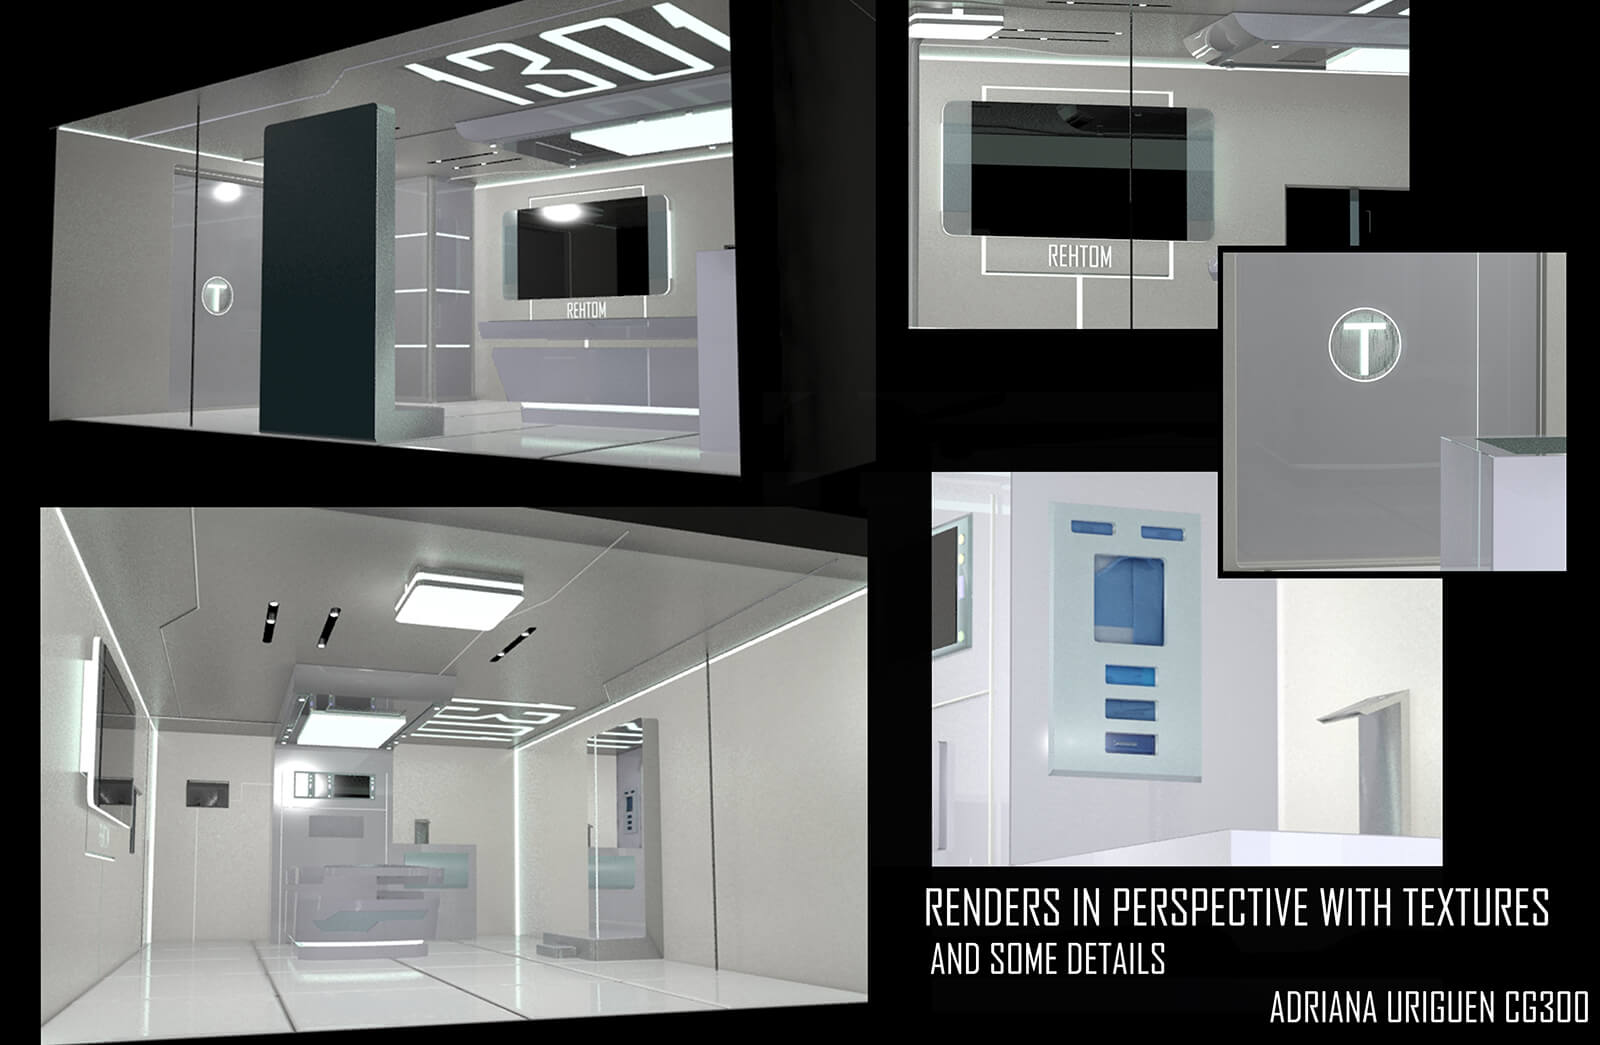 Renders of a futuristic medical bay with textures